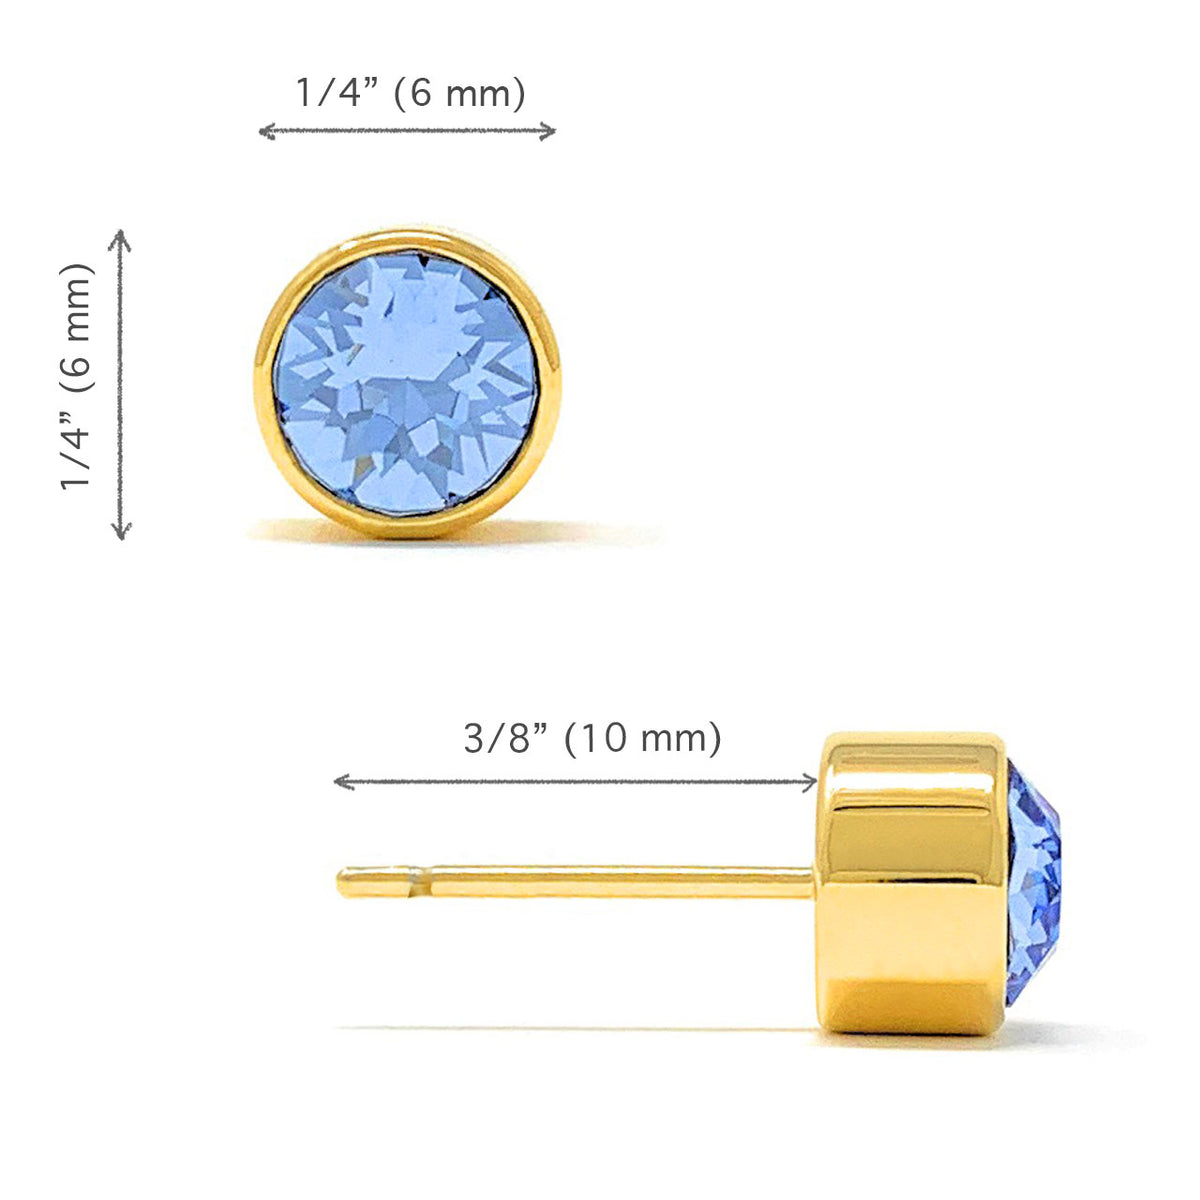 Harley Small Stud Earrings with Blue Light Sapphire Round Crystals from Swarovski Gold Plated - Ed Heart